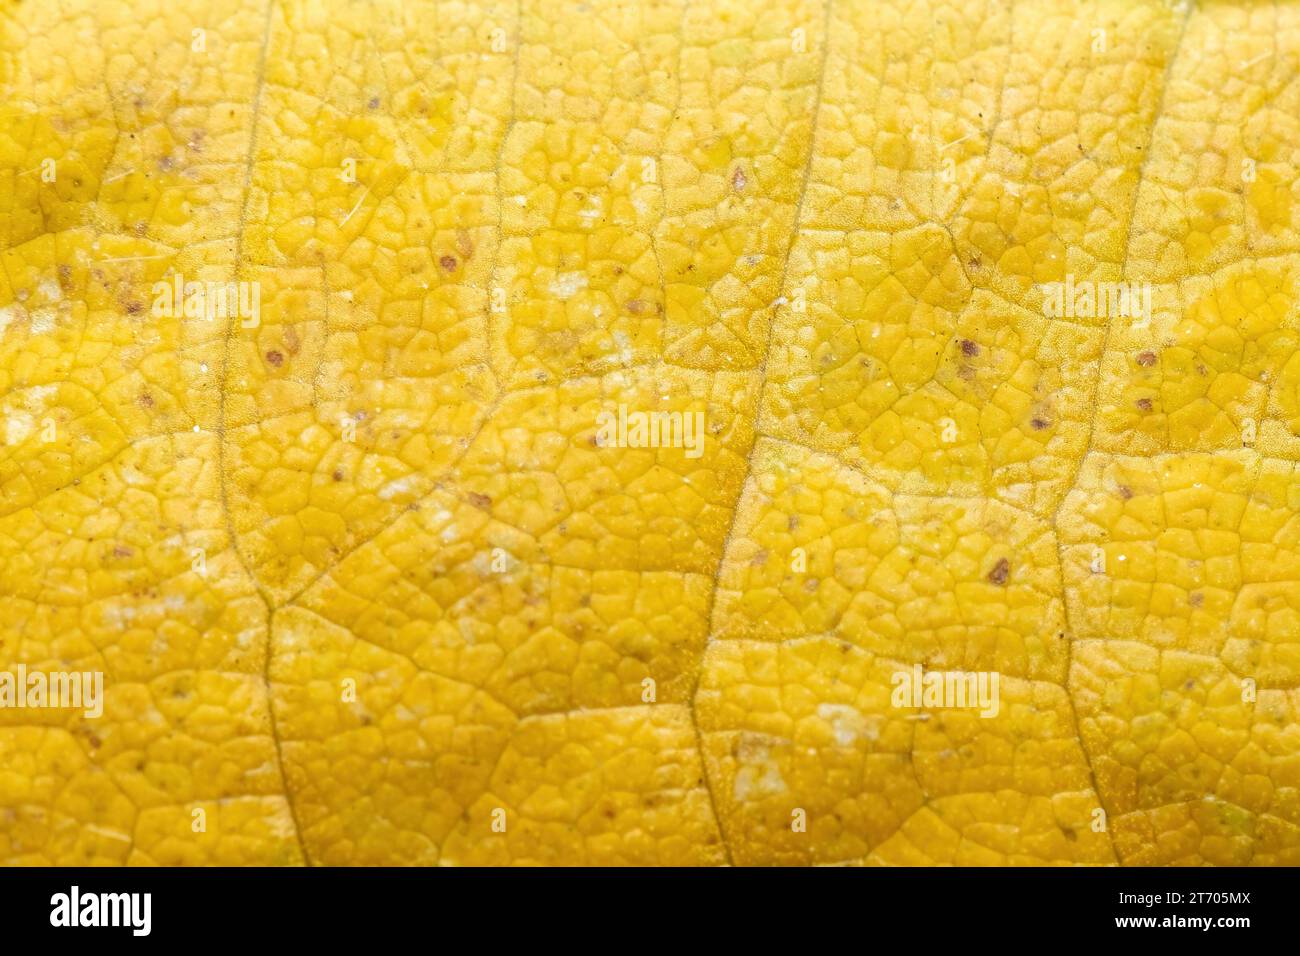 Solid yellow organic background from a senescing soybean leaf, inidicating autumn has arrived. Stock Photo